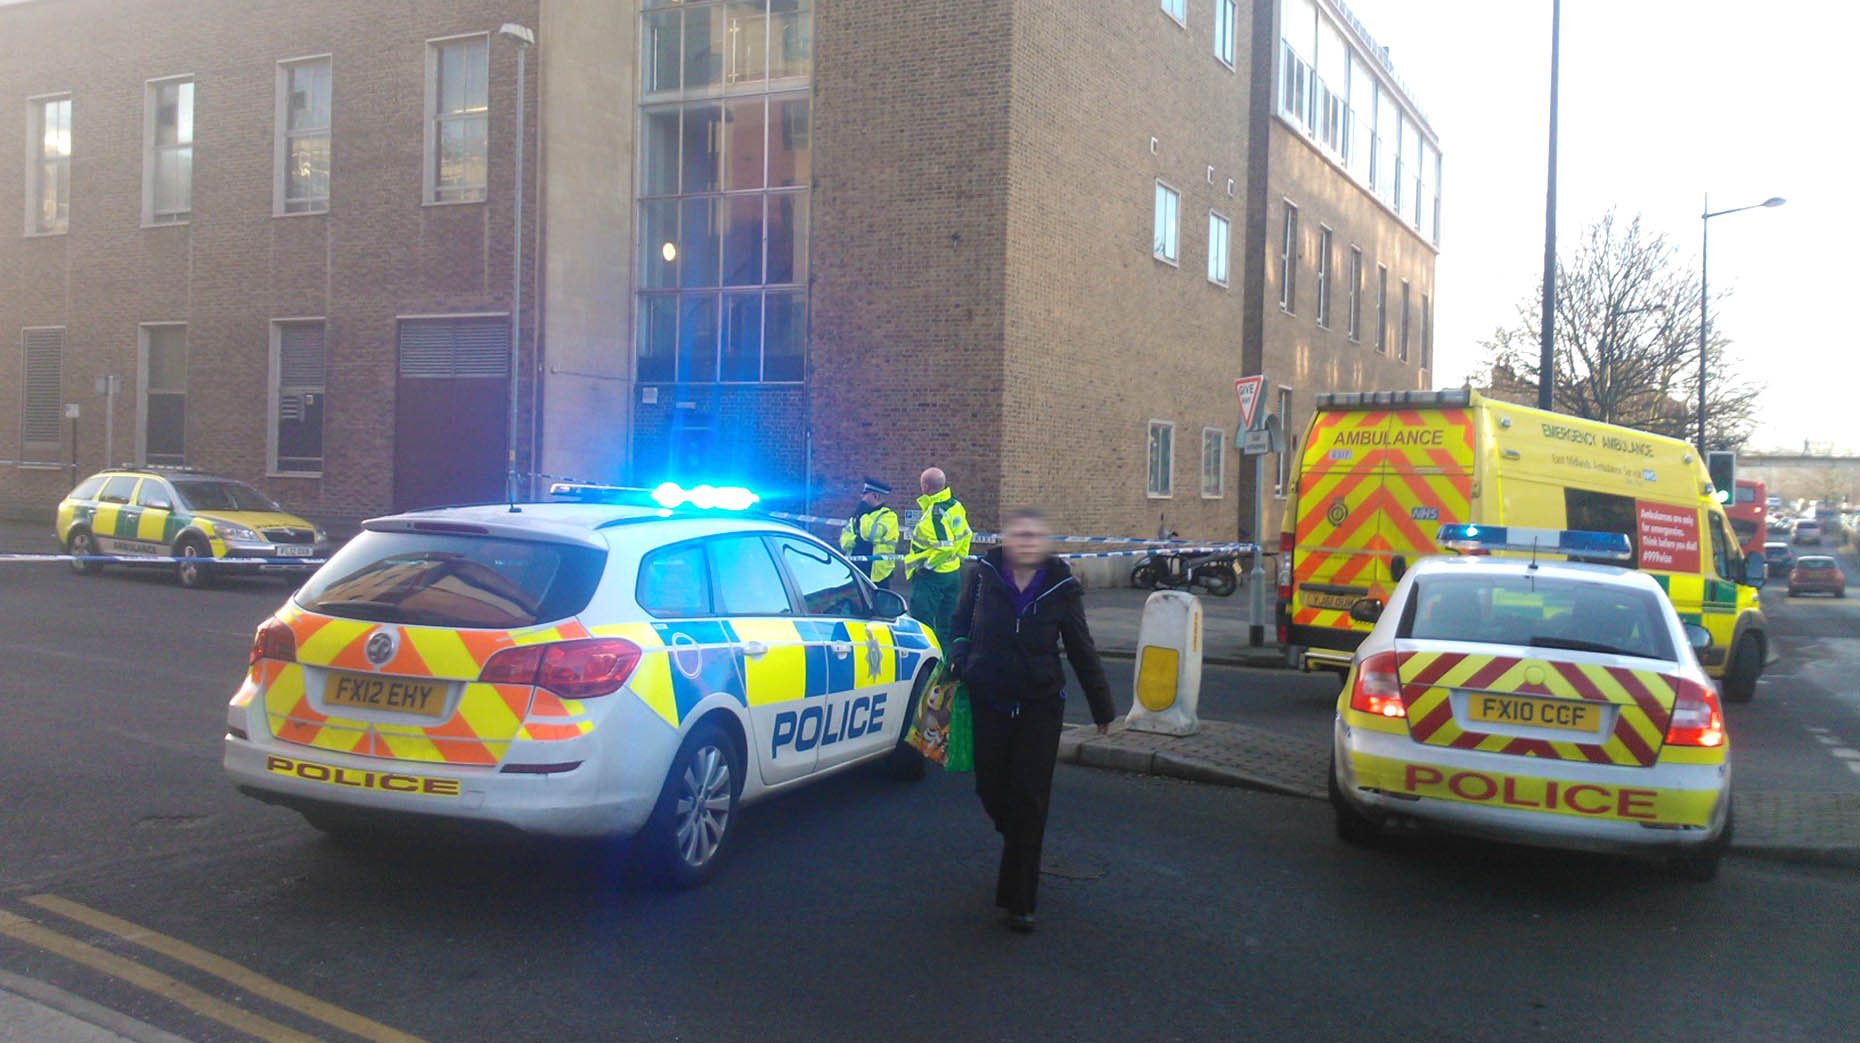 Police at the scene of the incident at Broadgate car park.